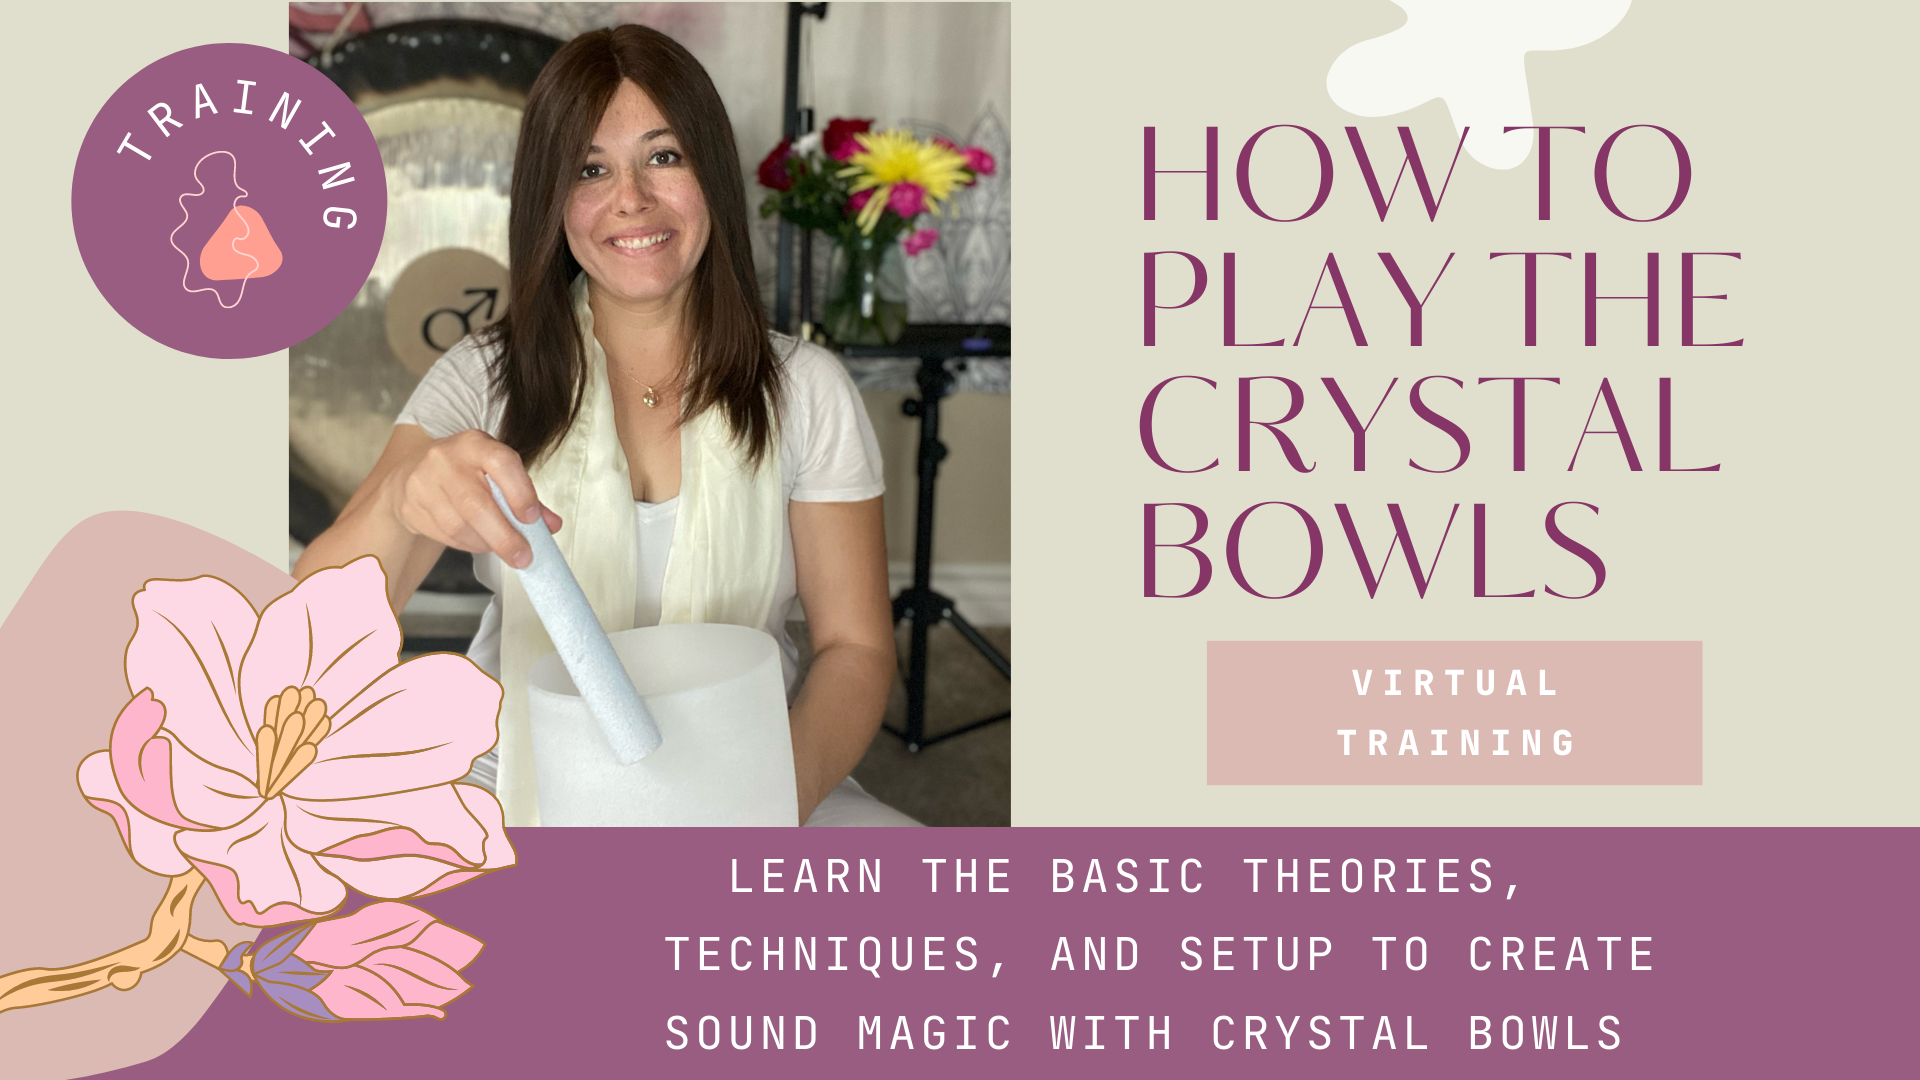 How to Play the Crystal Bowls